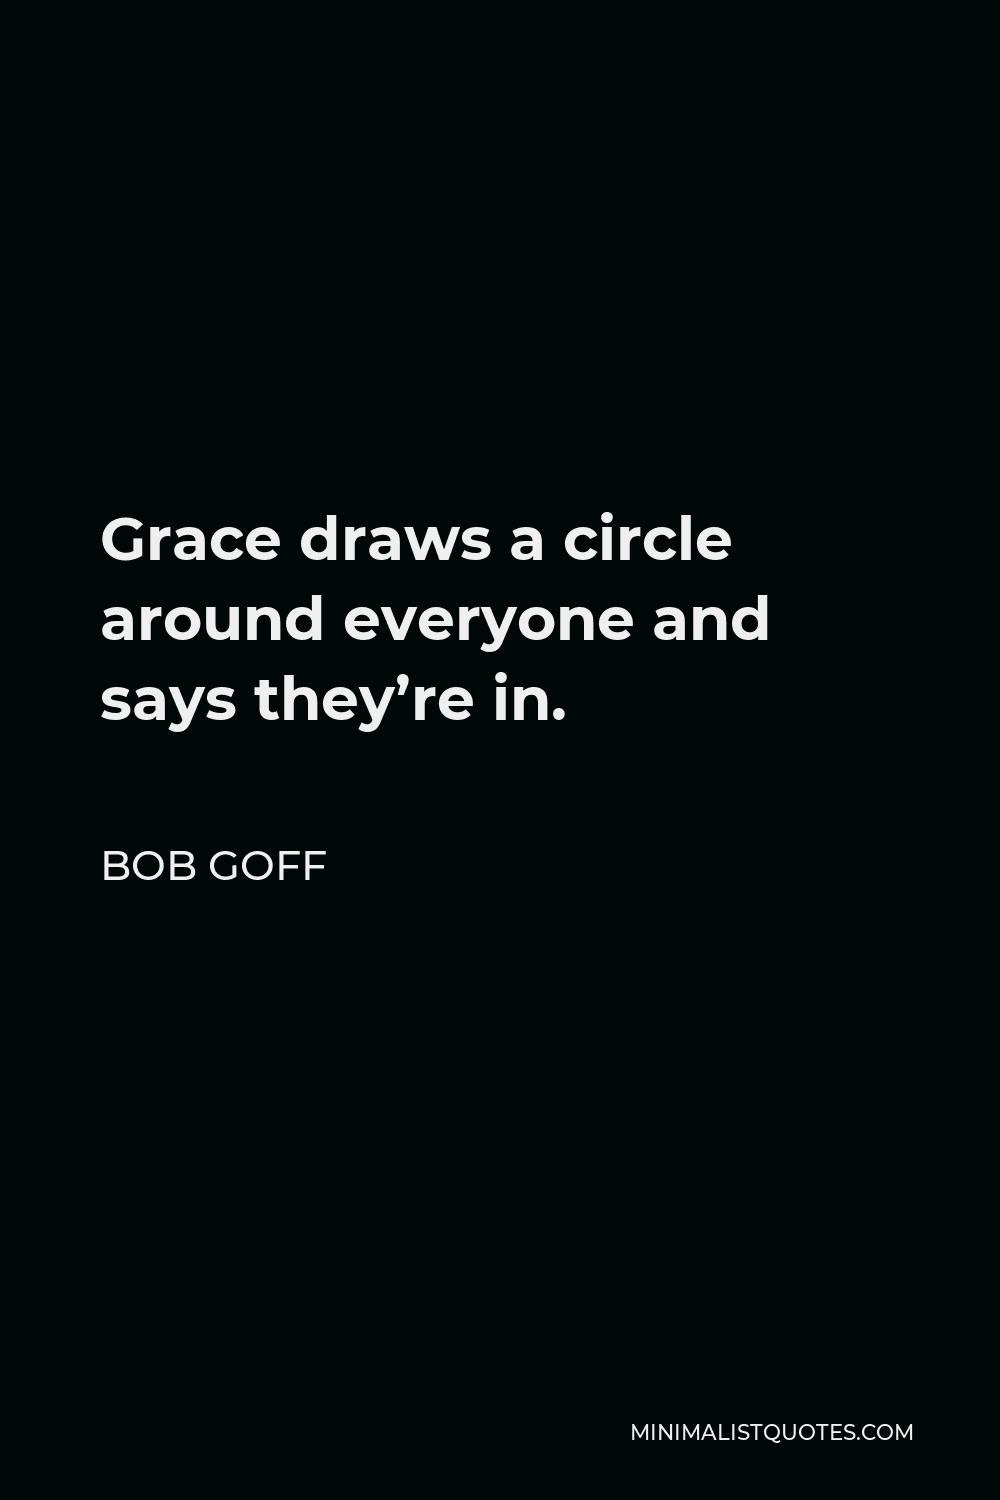 Bob Goff Quote - Grace draws a circle around everyone and says they’re in.